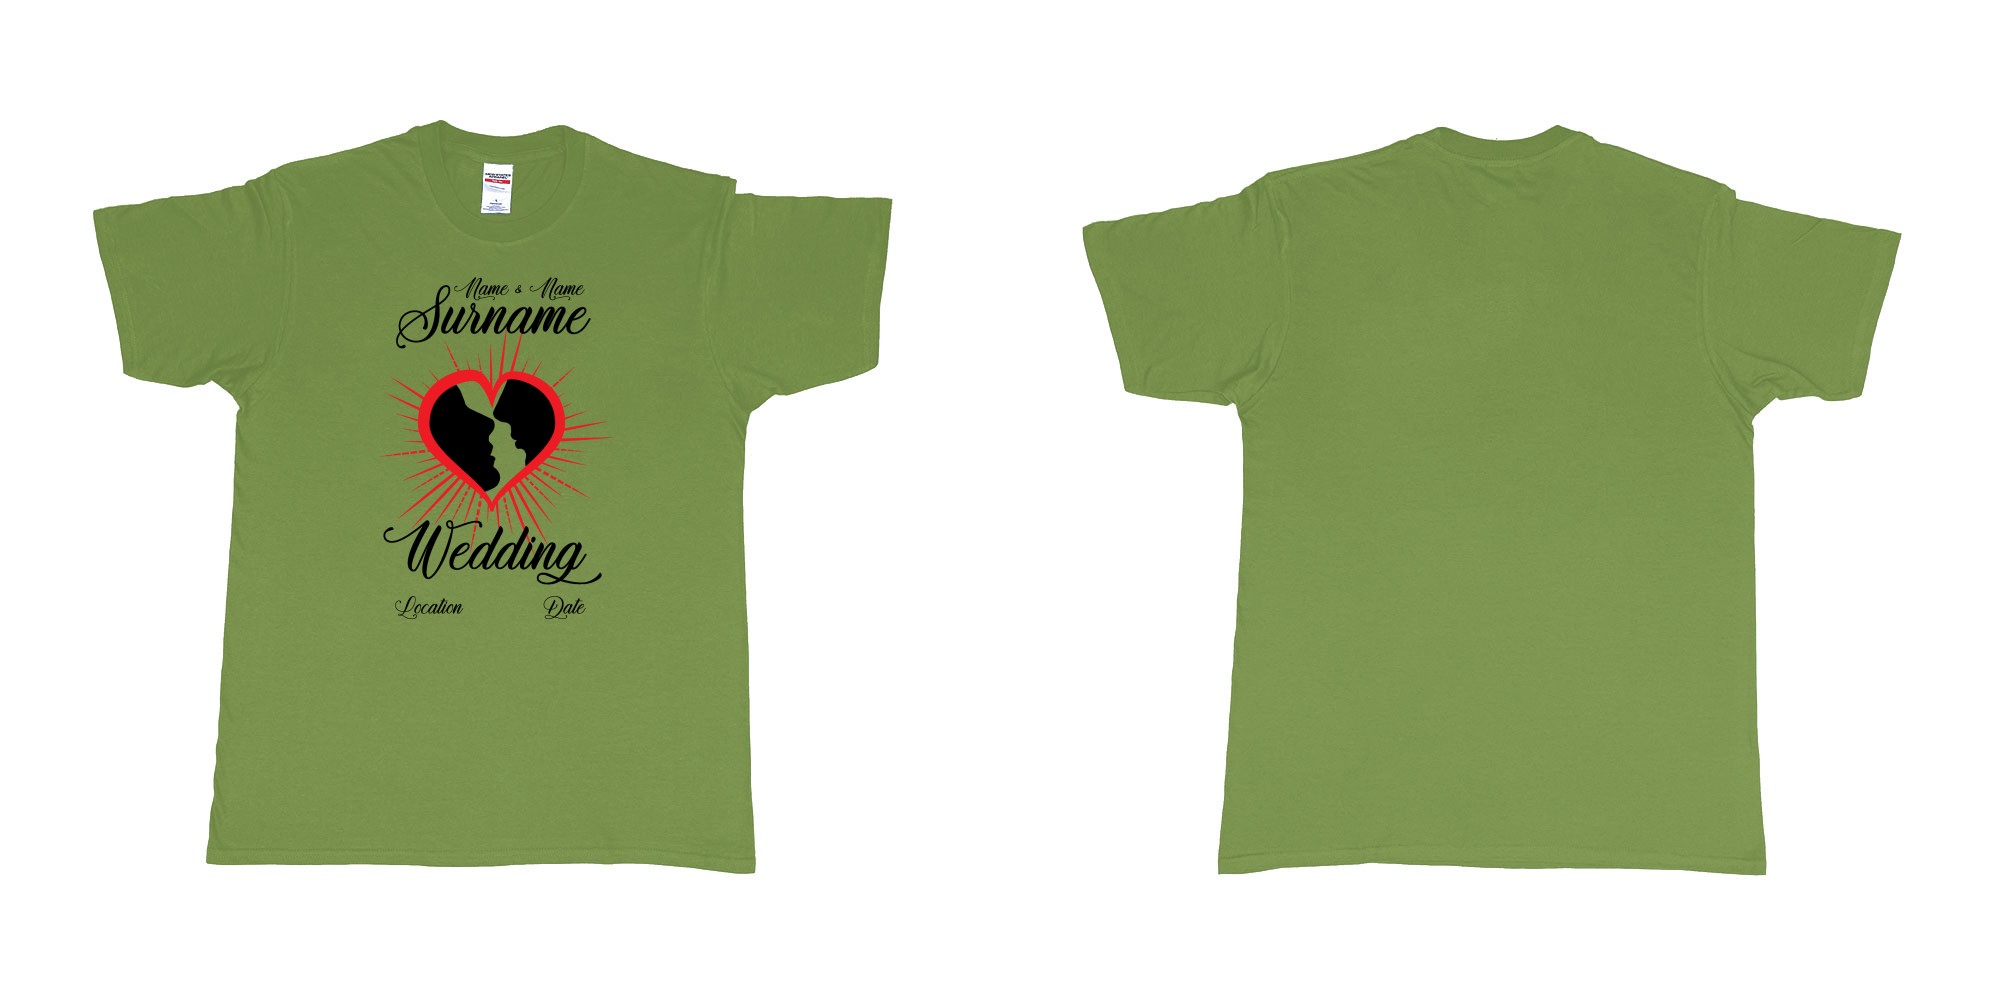 Custom tshirt design wedding heart kiss custom names surname location date bali in fabric color military-green choice your own text made in Bali by The Pirate Way